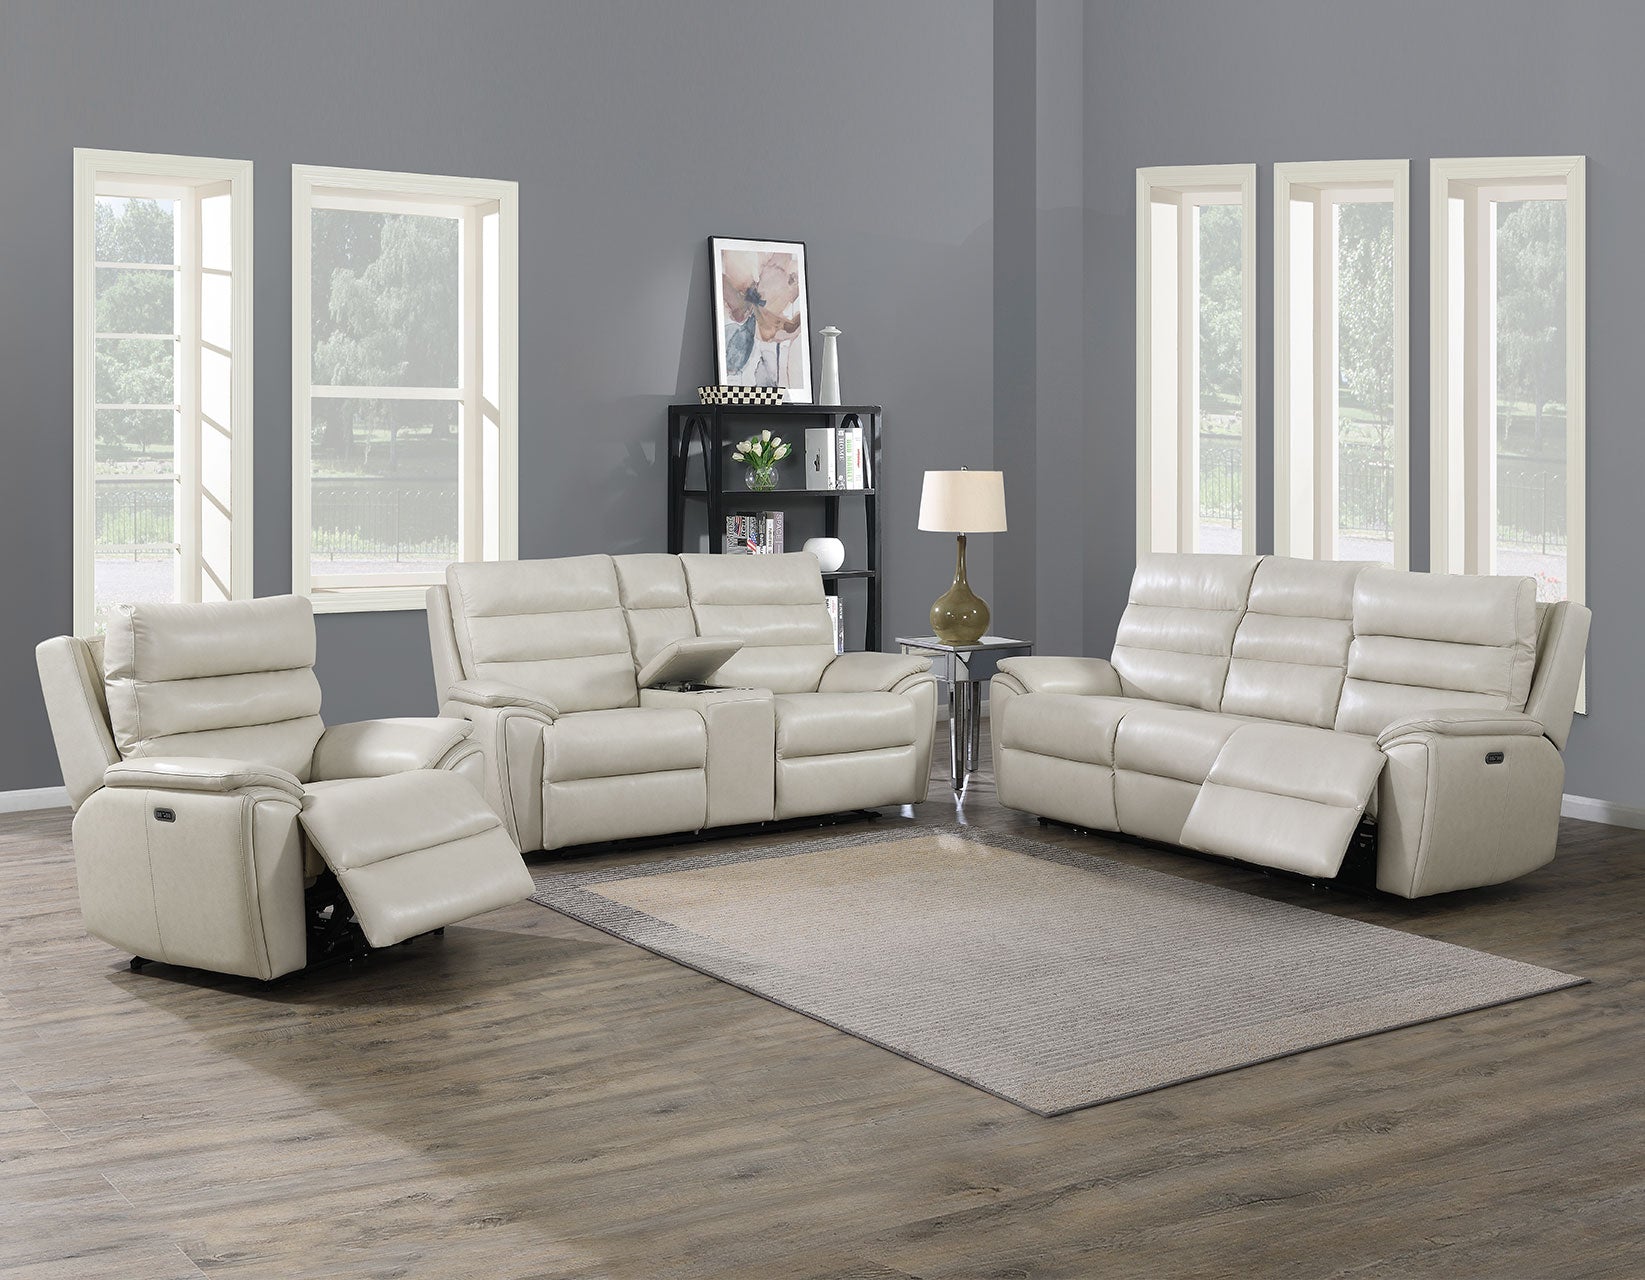 DUVAL IVORY DUAL-POWER LEATHER RECLINING 3 PIECE SET (SOFA,LOVESEAT & CHAIR)